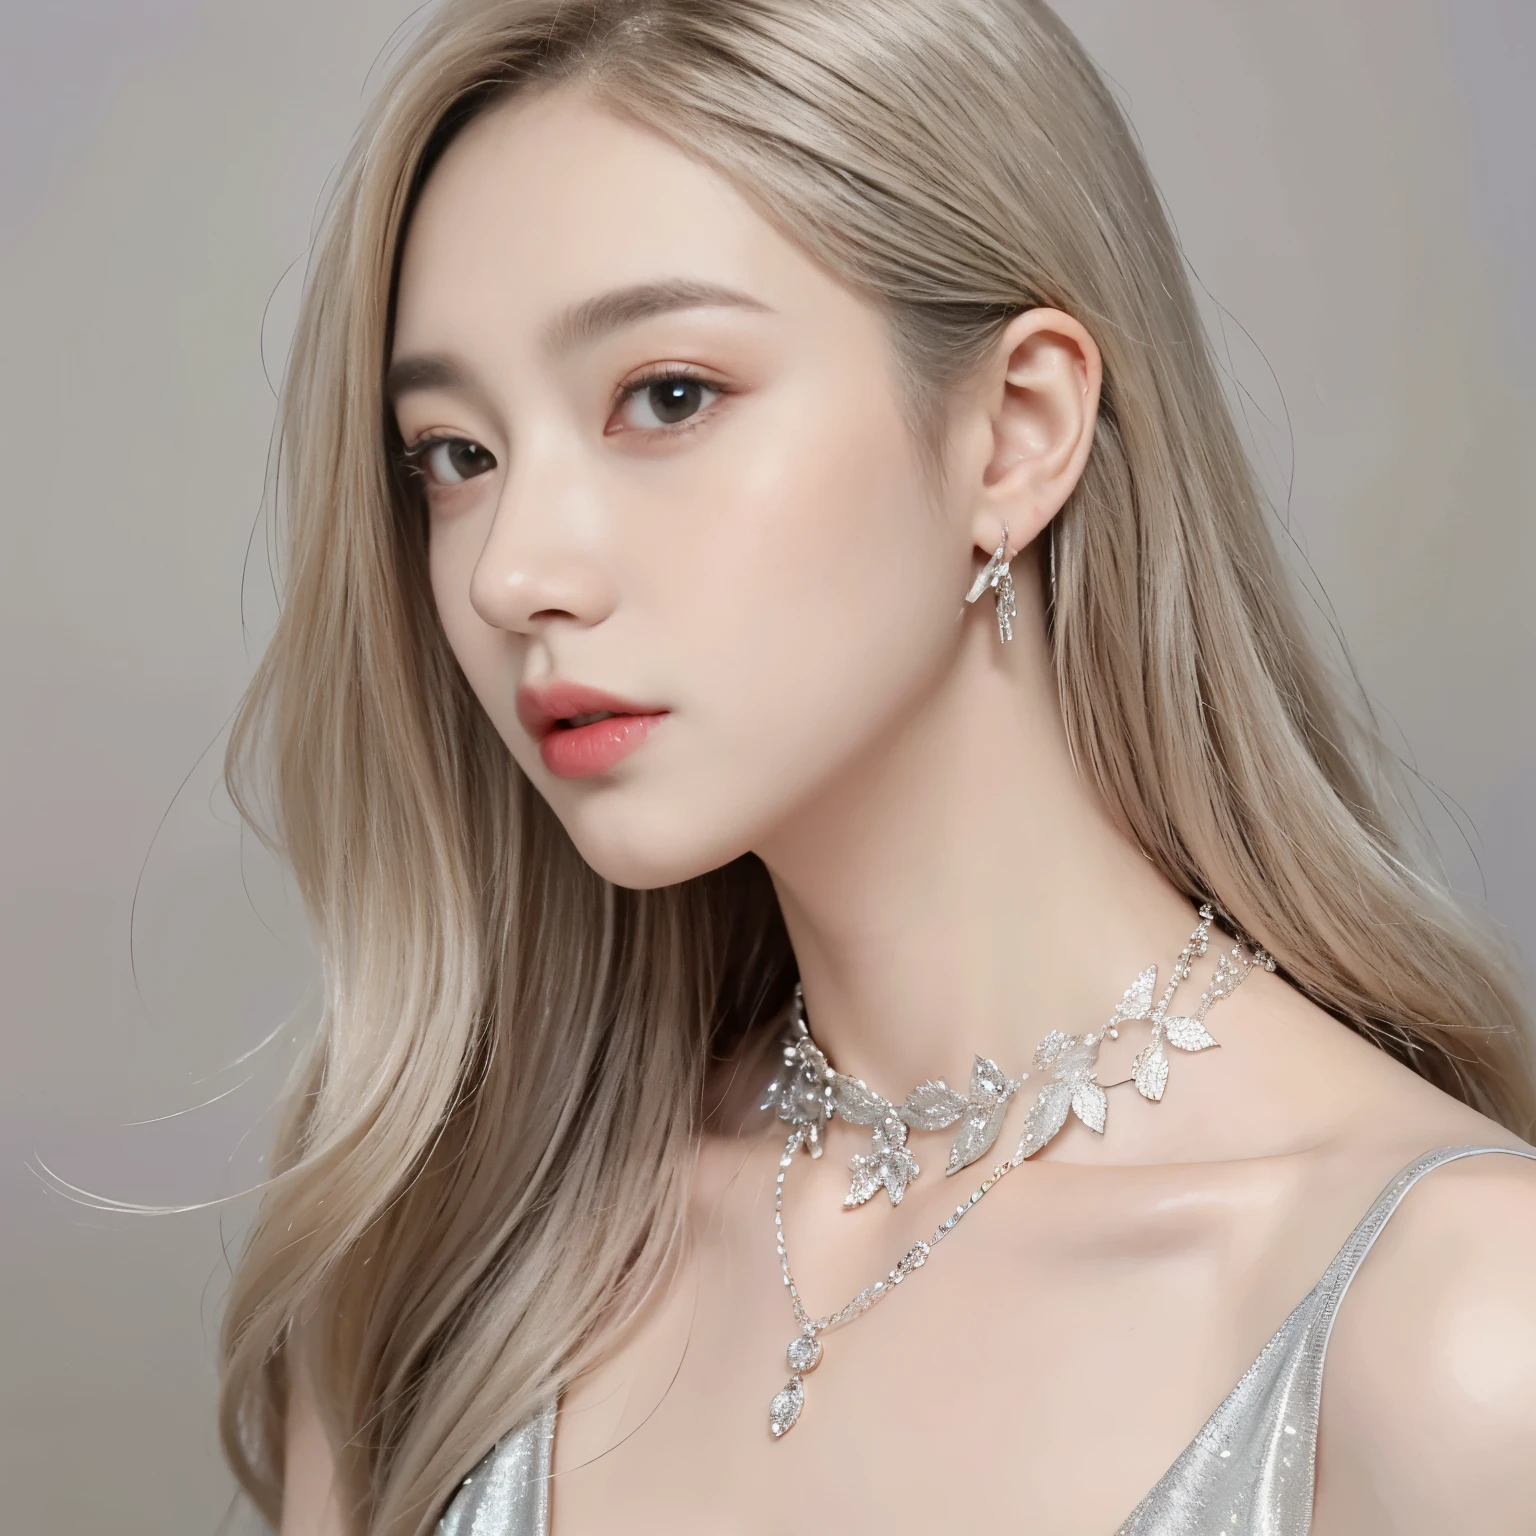 （8K）、（Best image quality:1.5）、gray background、face close up、１girl、masterpiece、Delicate and sharp eyes、brown eyes、power of eyes、delicate face、cup、fascinating face、platinum blonde hair、Half length wave、cute clothes、Dress that exposes the collarbone、female、collarbone emphasis、earring、necklace、